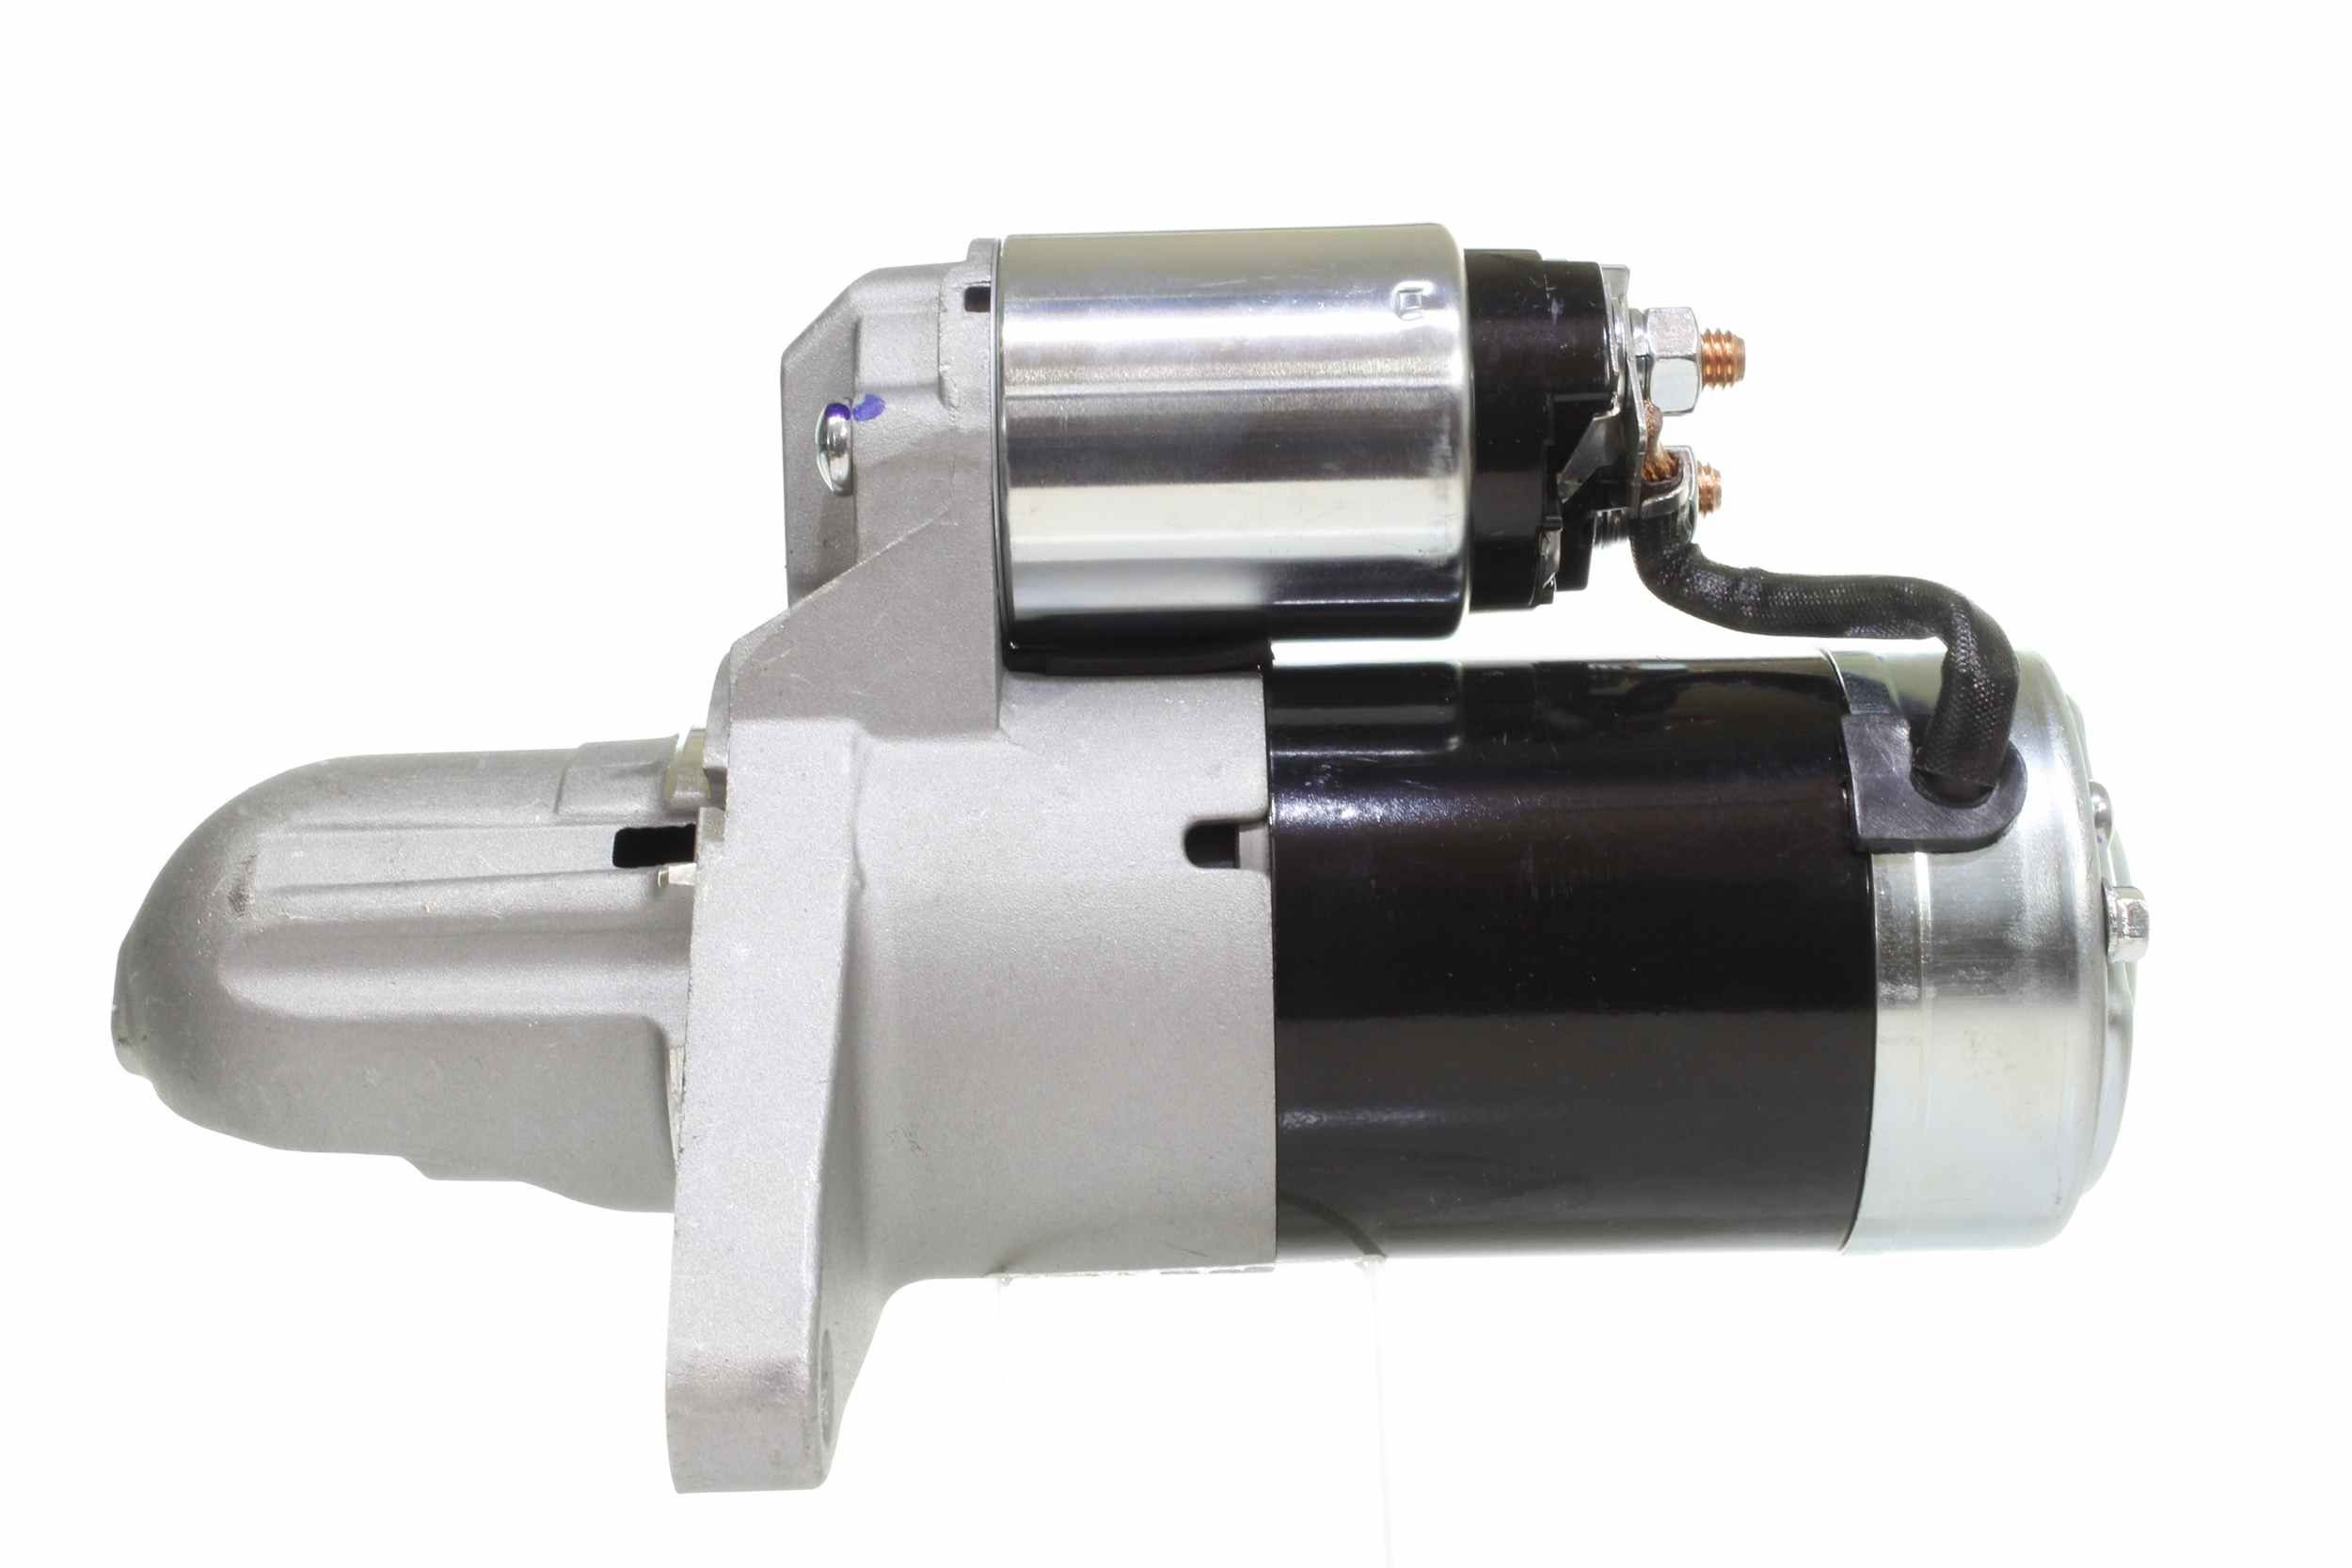 10439571 Engine starter motor ALANKO RNLM1T30471 review and test